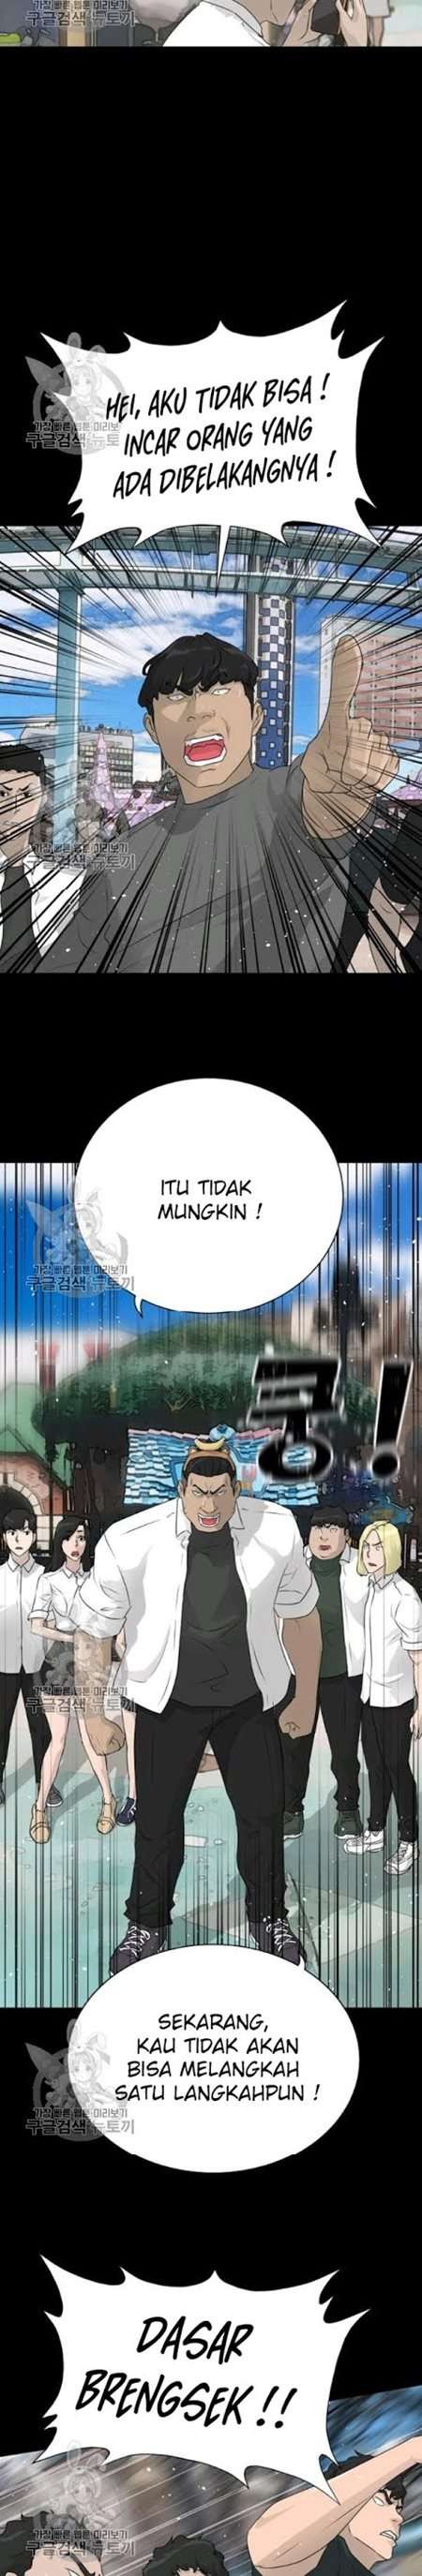 Trigger Chapter 63